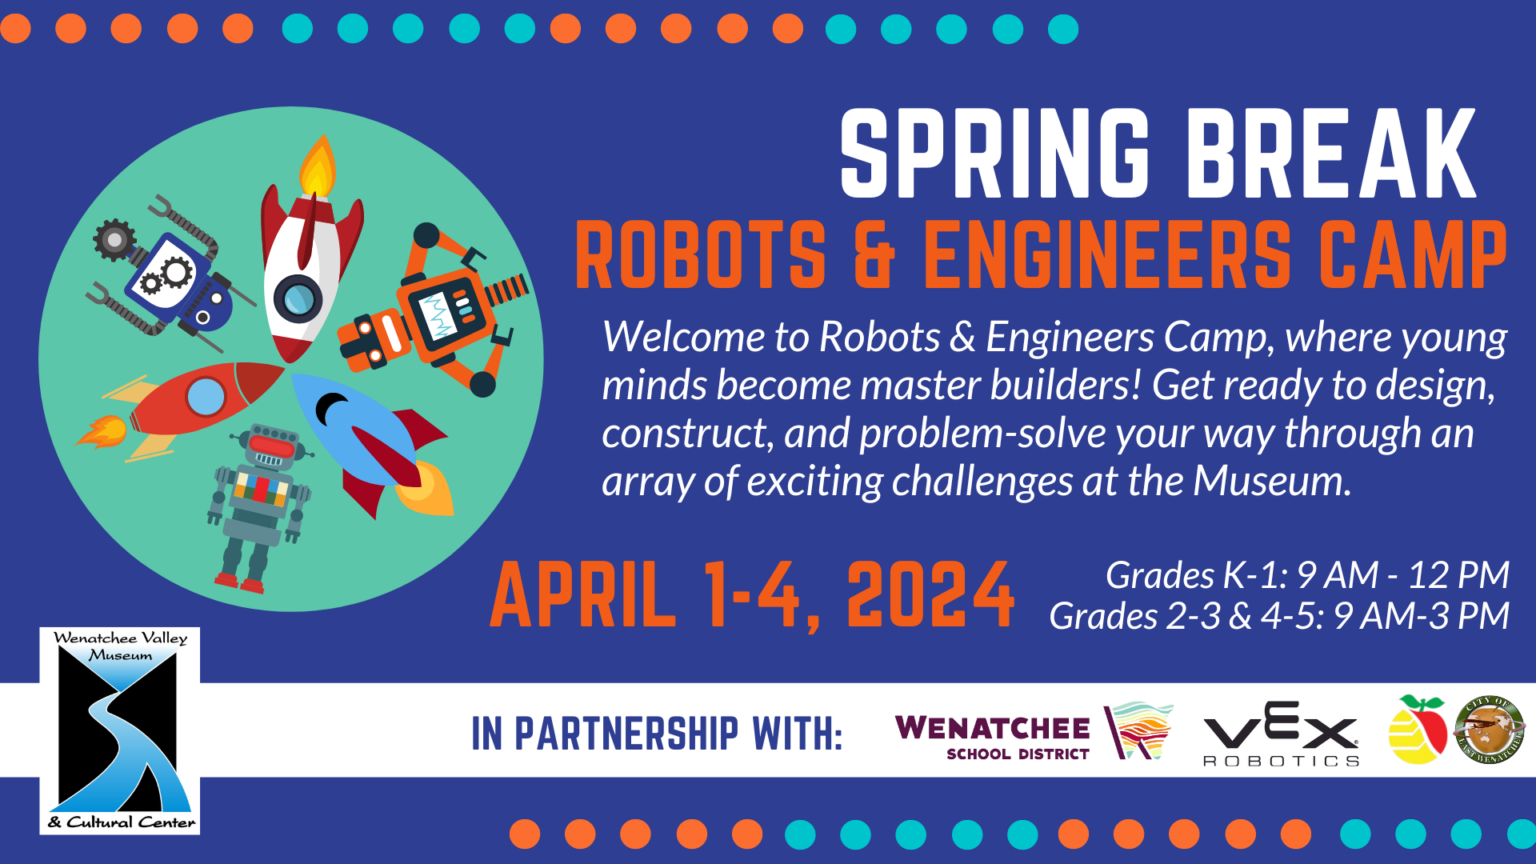 <h1 class="tribe-events-single-event-title">Spring Break Robots & Engineers Camp</h1>